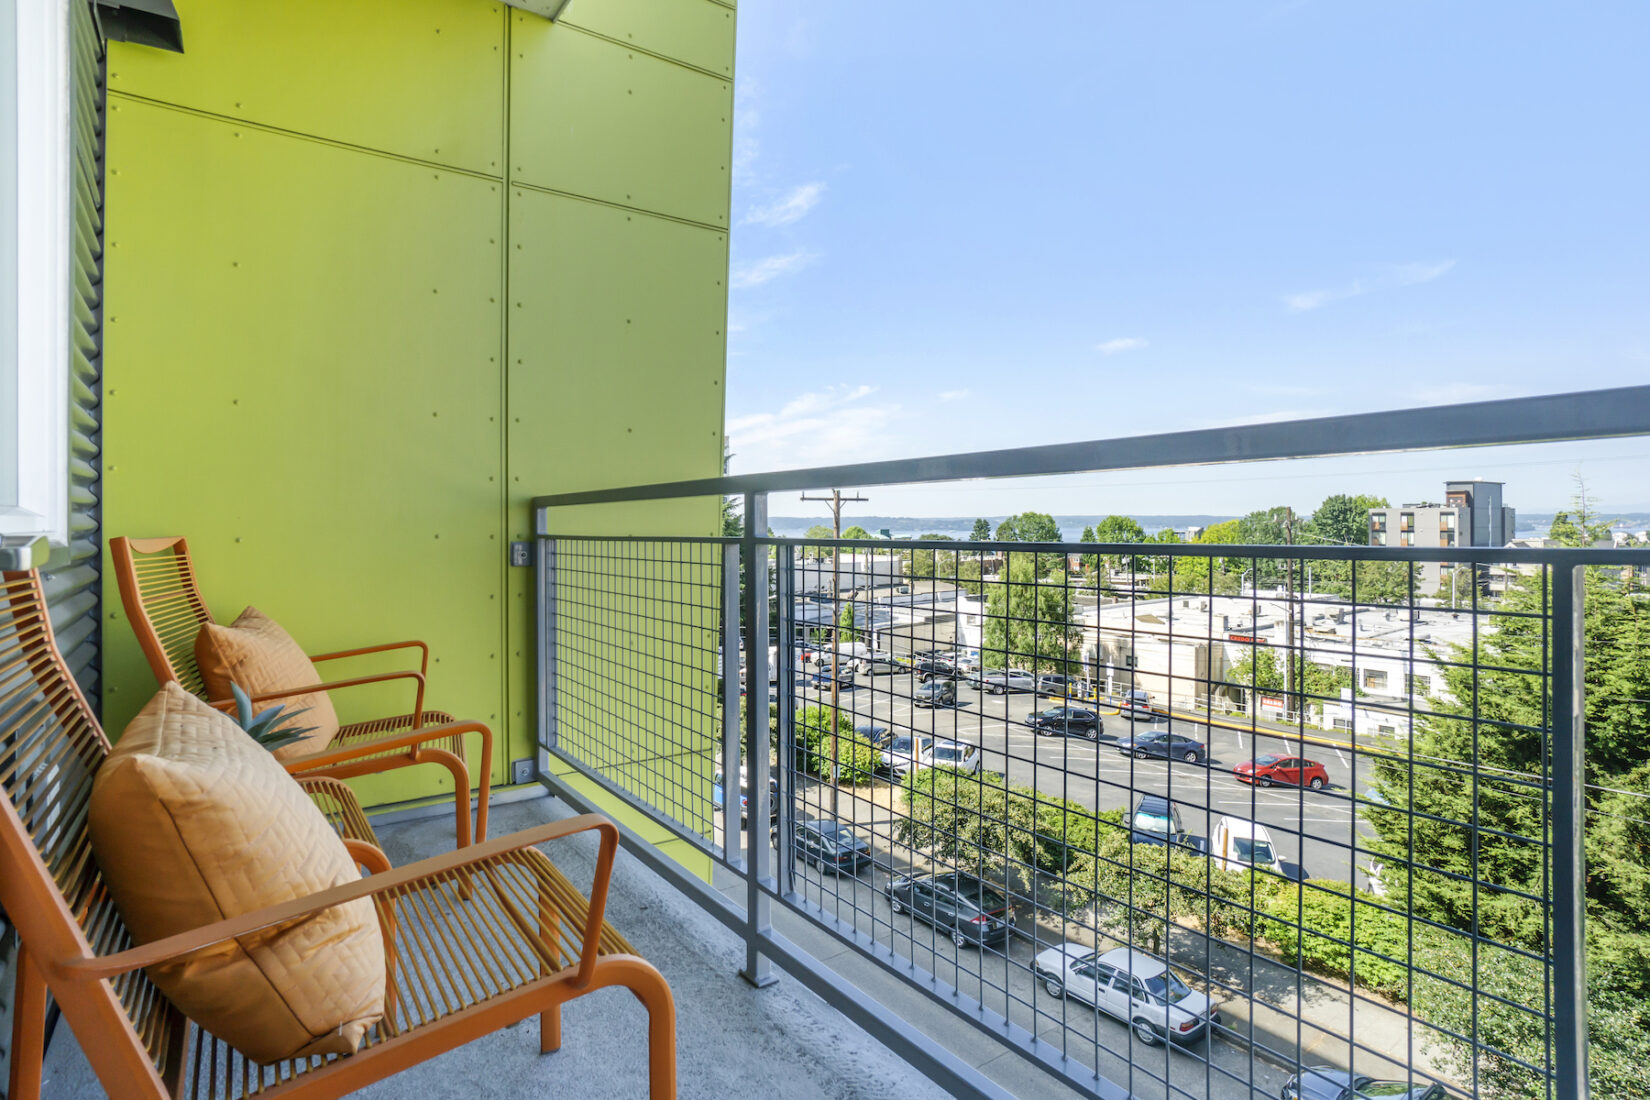 The balcony of a Portland multifamily complex decorated with patio chairs.